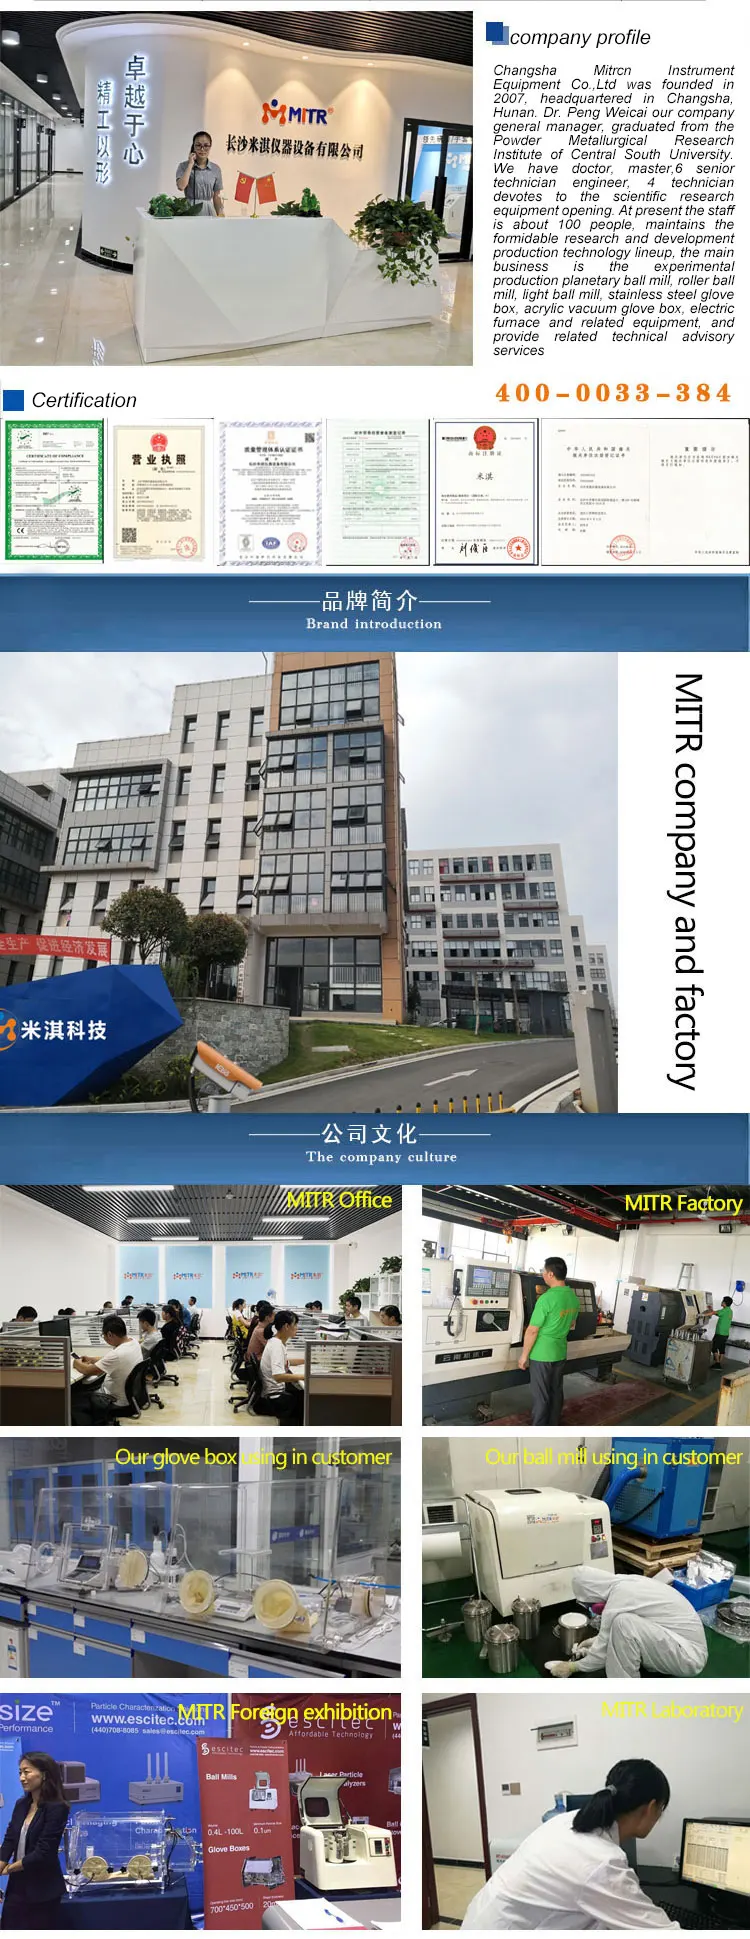 MITR Factory and Office.jpg